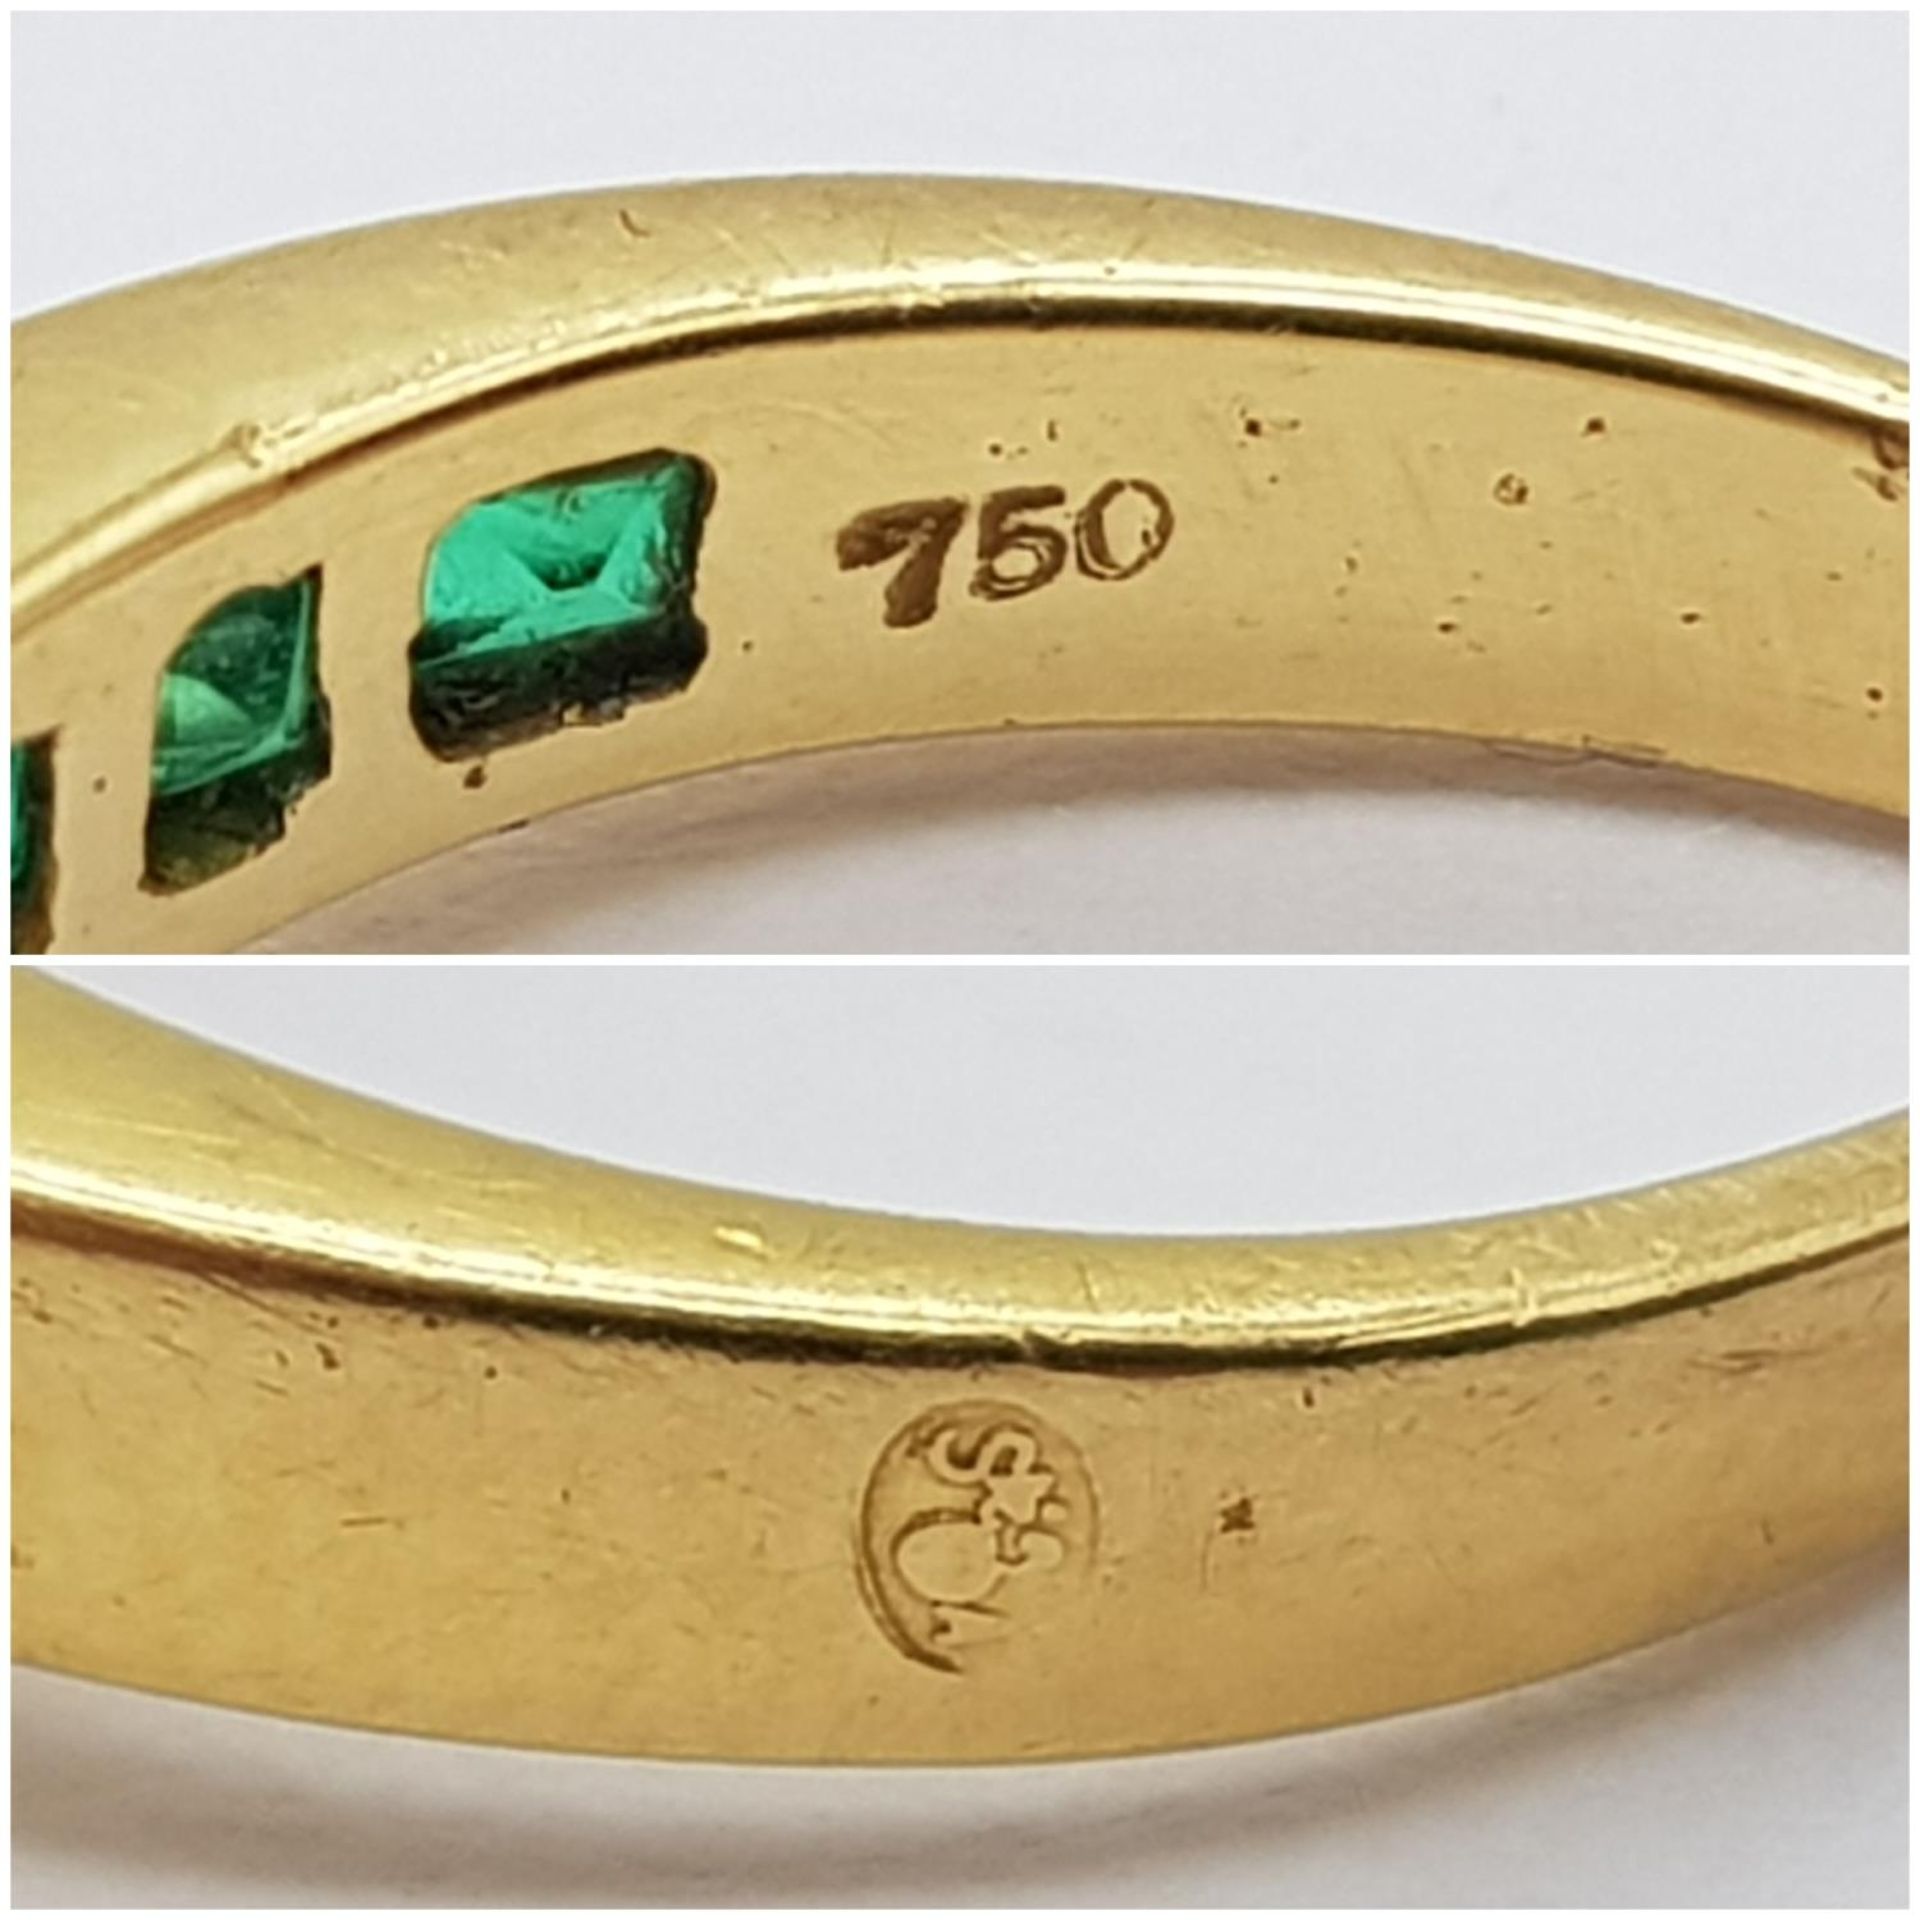 AN 18K YELLOW GOLD DIAMOND & EMERALD RING. Size J, 2.3g total weight. Ref: SC 9052 - Image 6 of 6